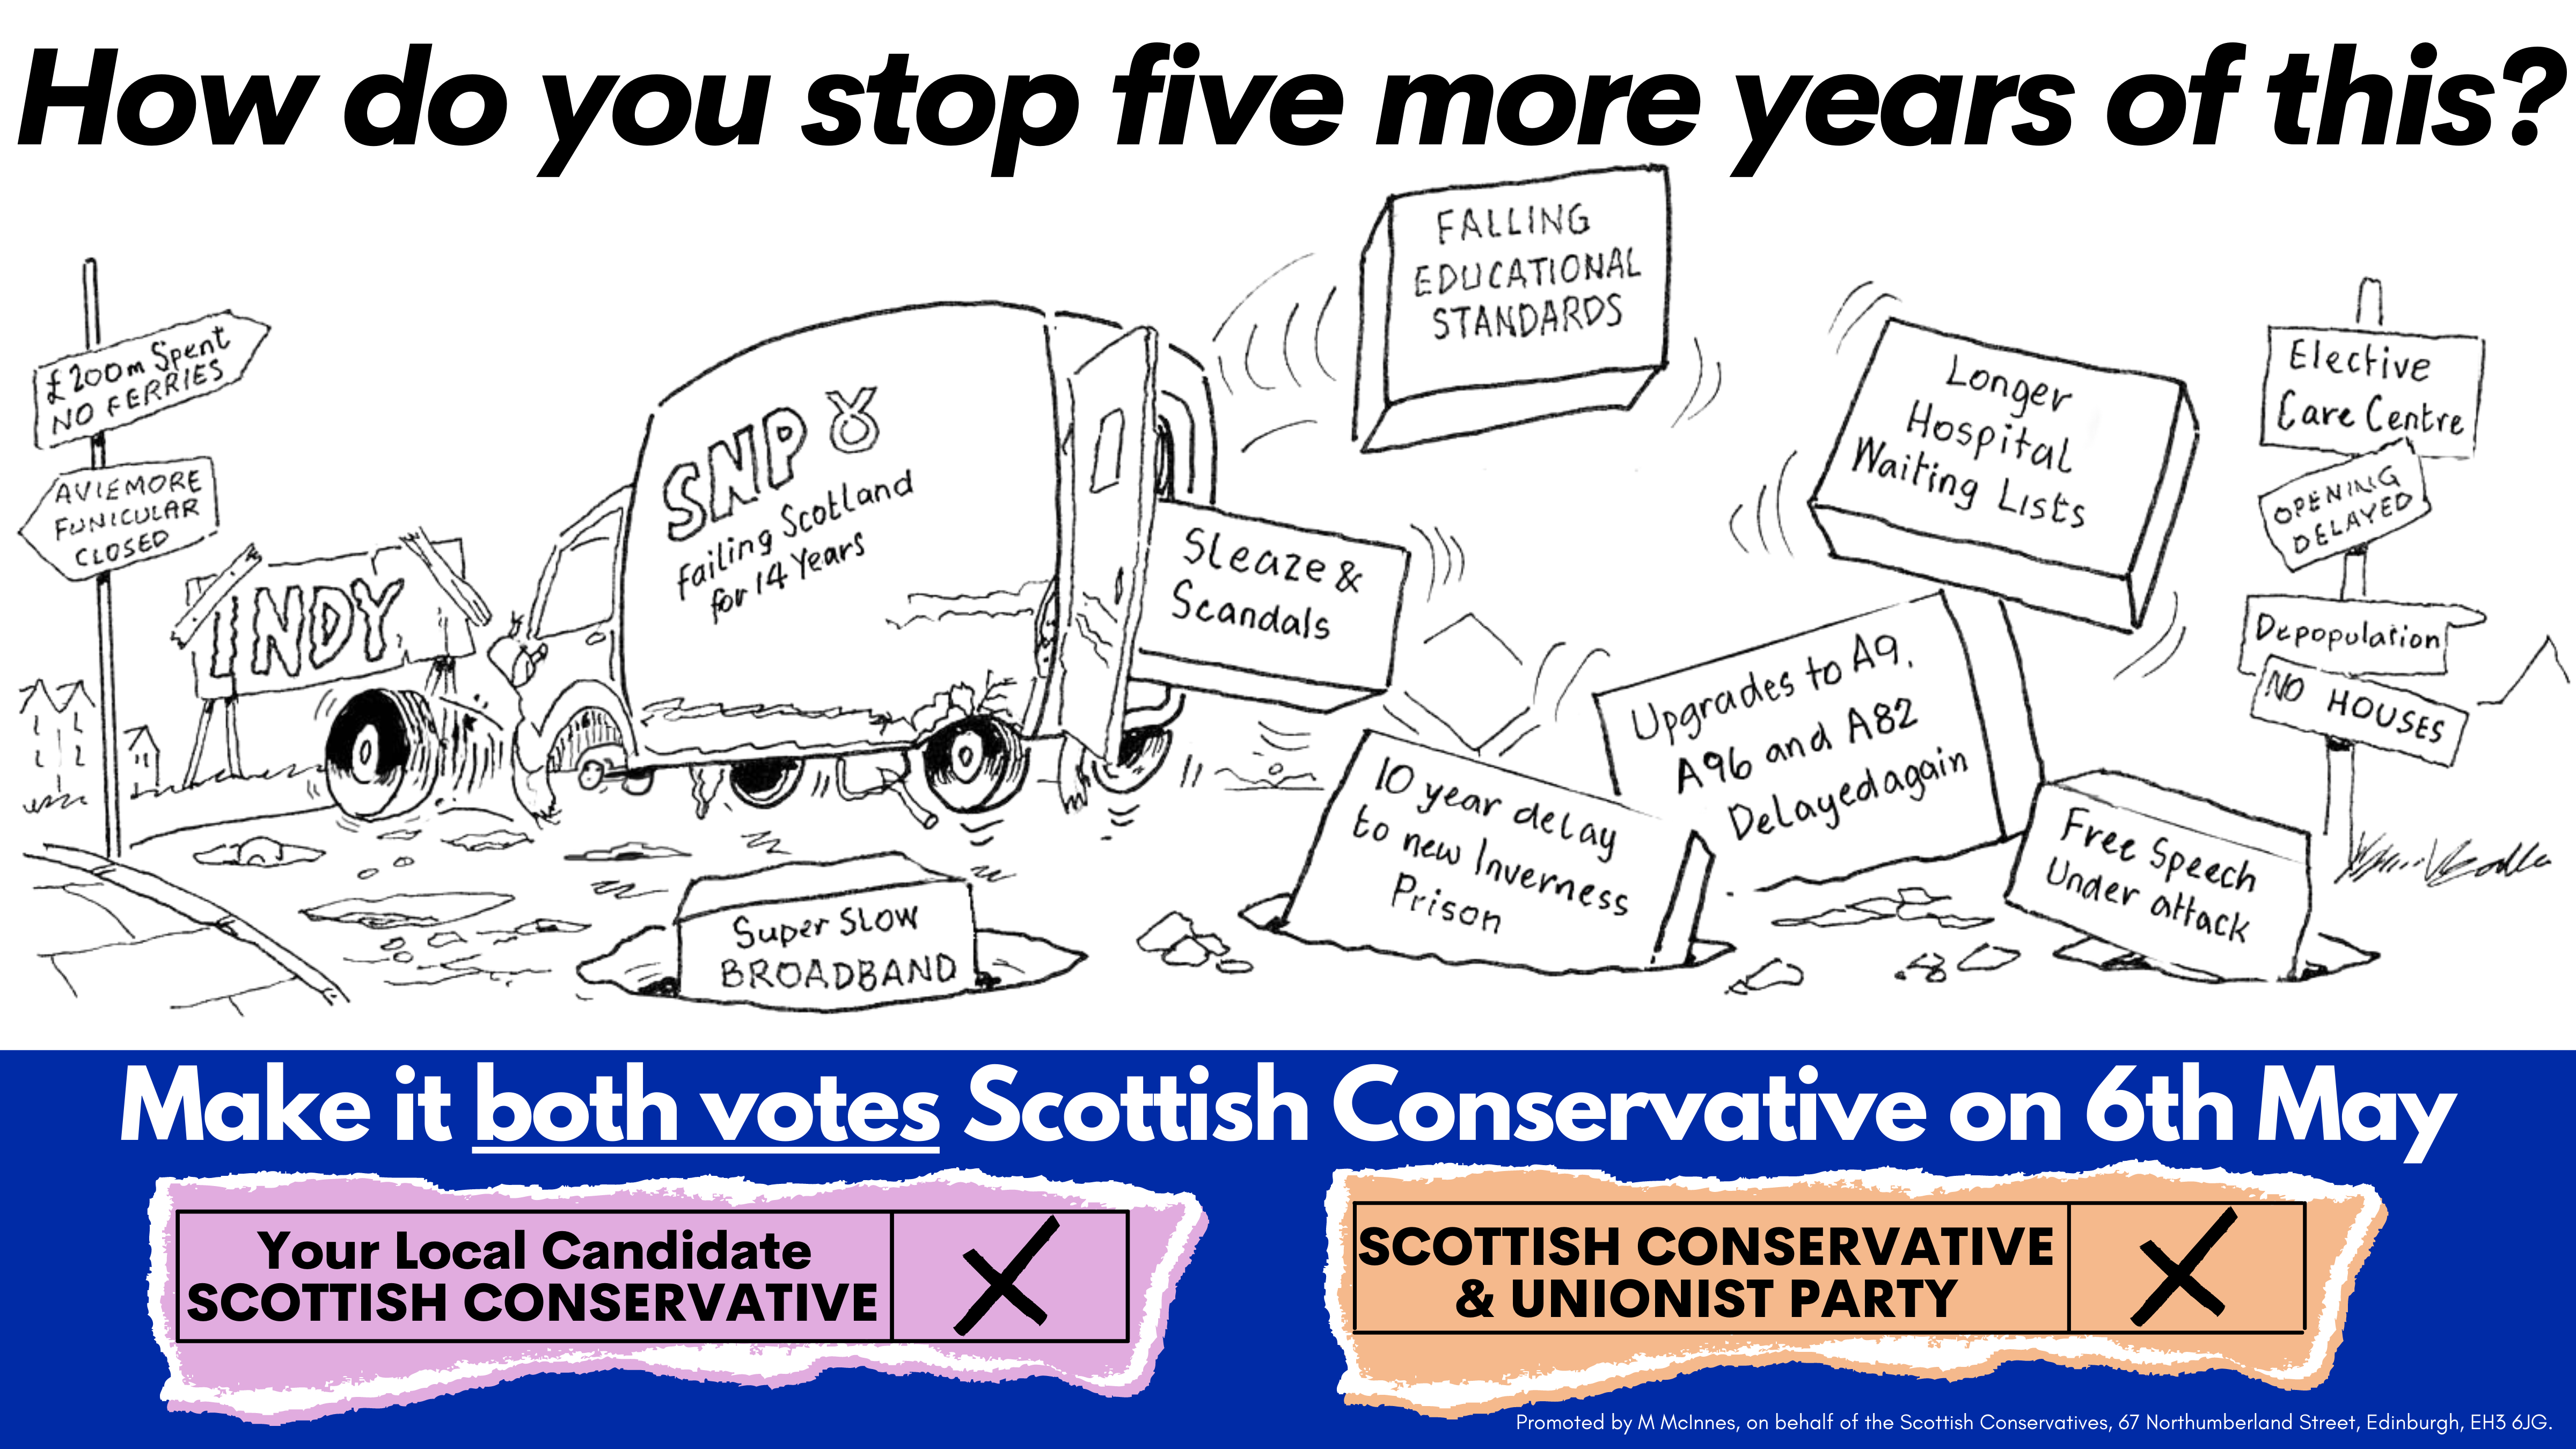 Fourteen years of SNP failure - and how to stop the SNP wrecking Scotland